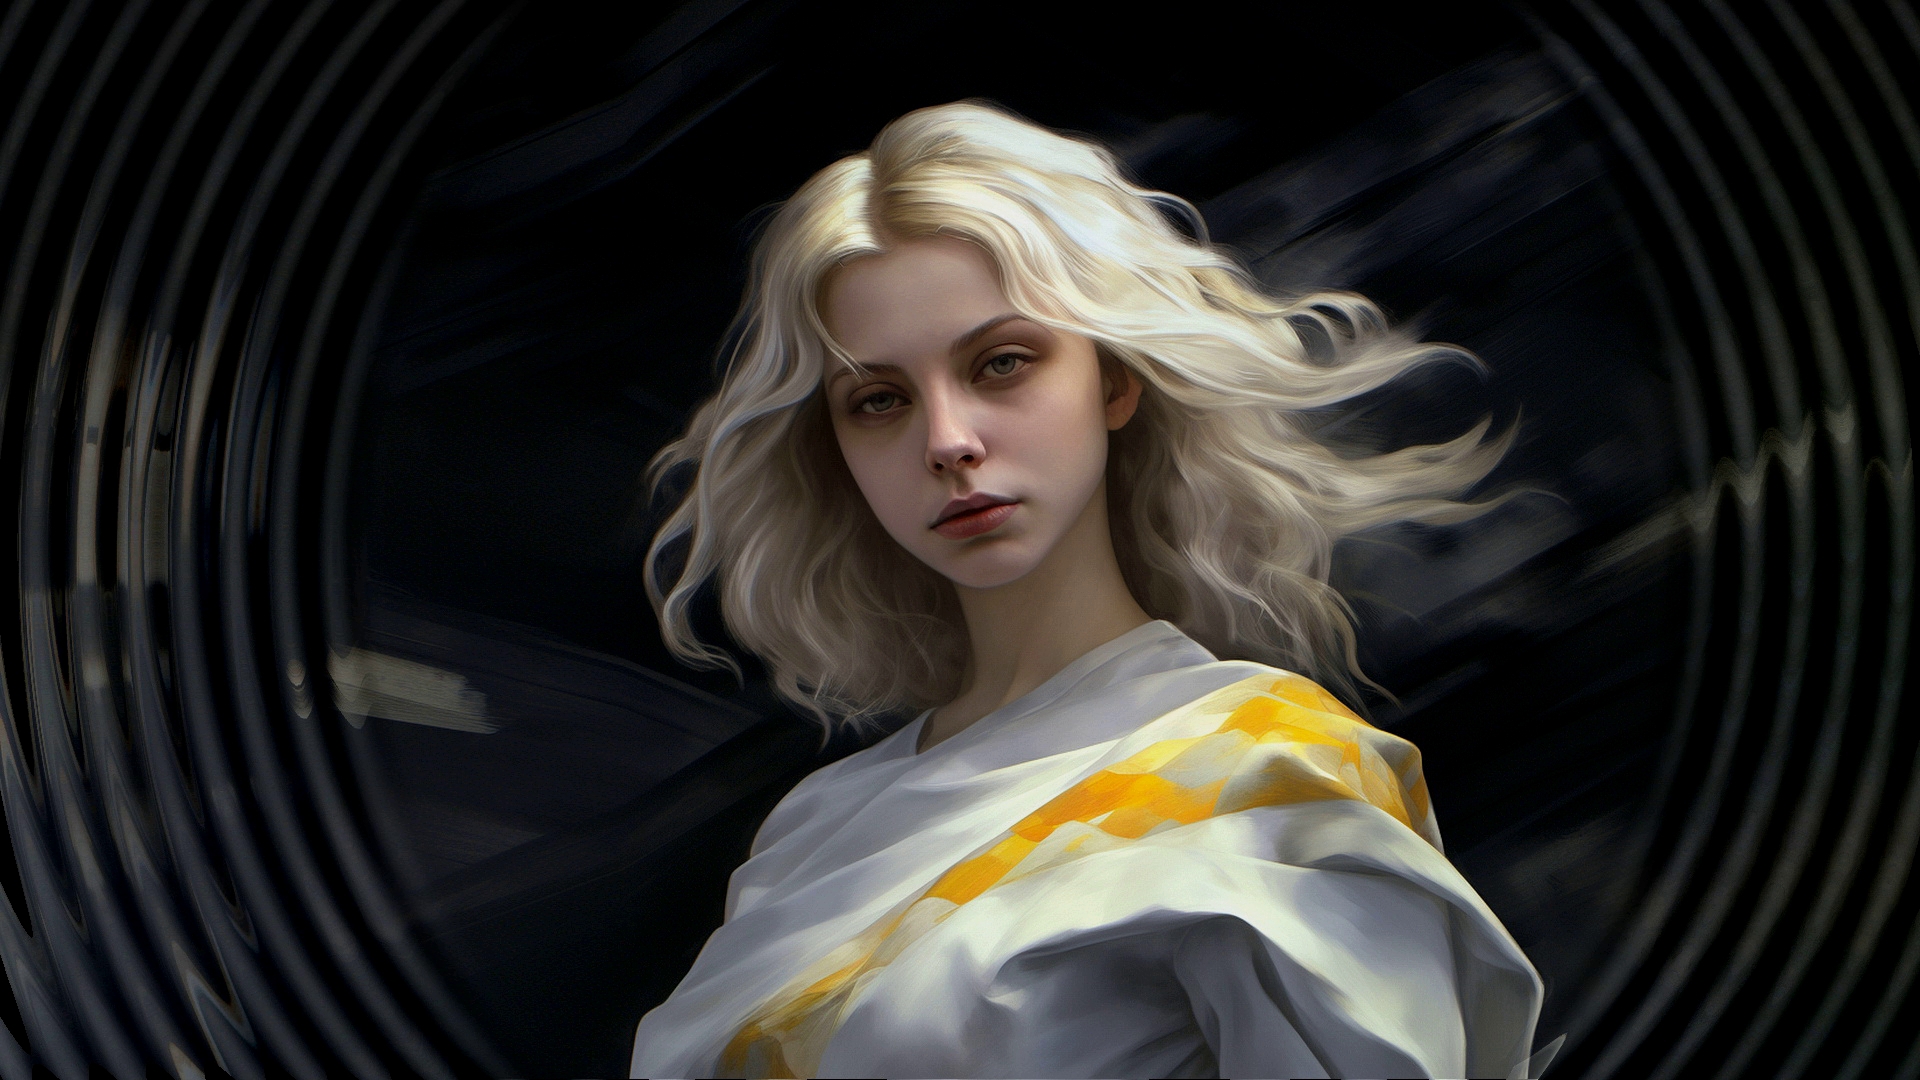 Drawing of a blonde girl on a dark background